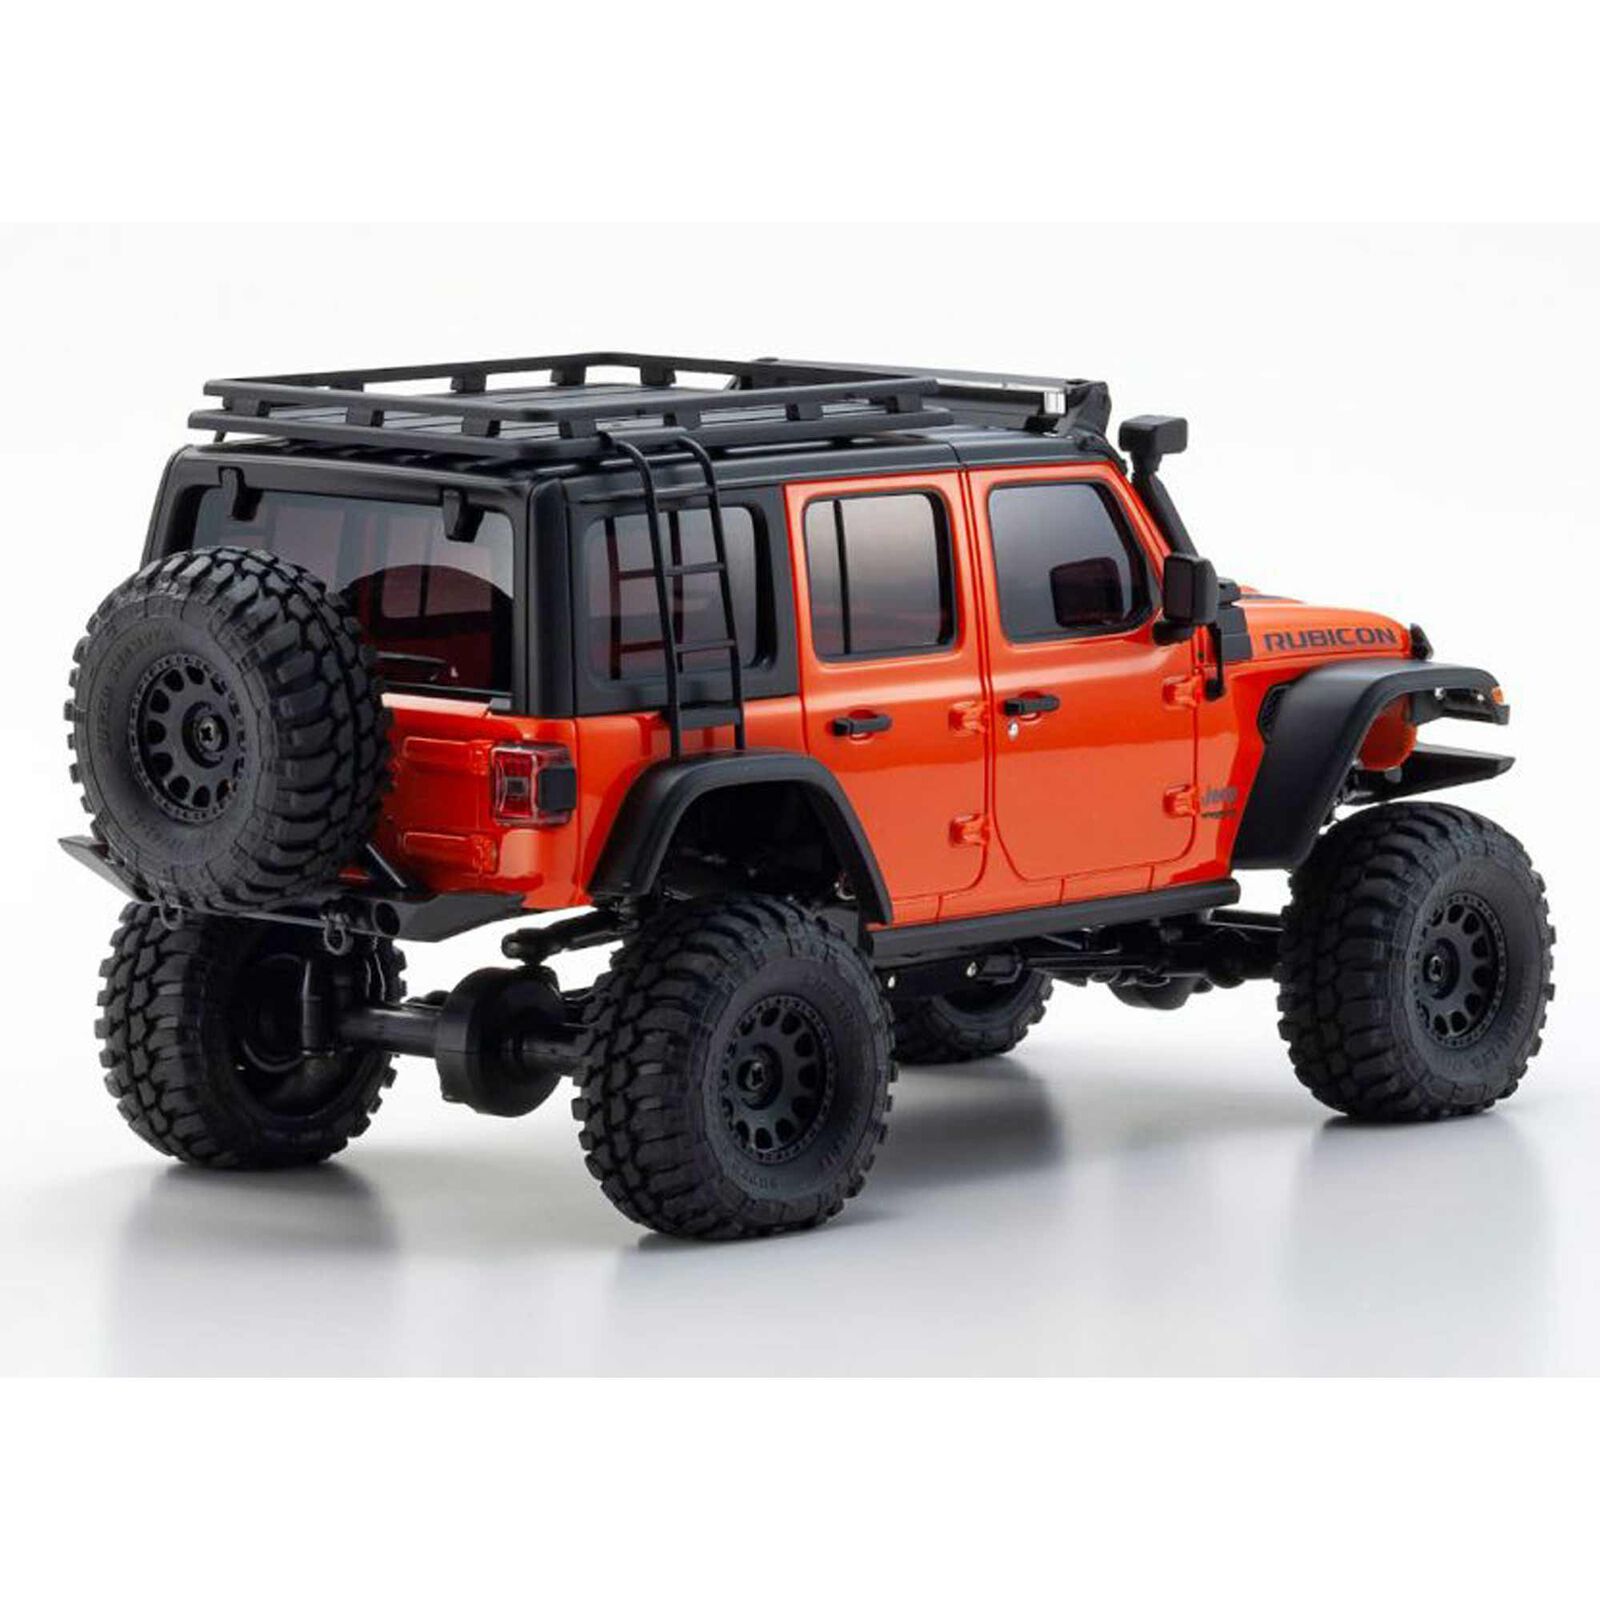 Kyosho Mini-Z 4x4 Jeep Wrangler Unlimited Rubicon With Accessory Parts  [VIDEO] - RC Car Action